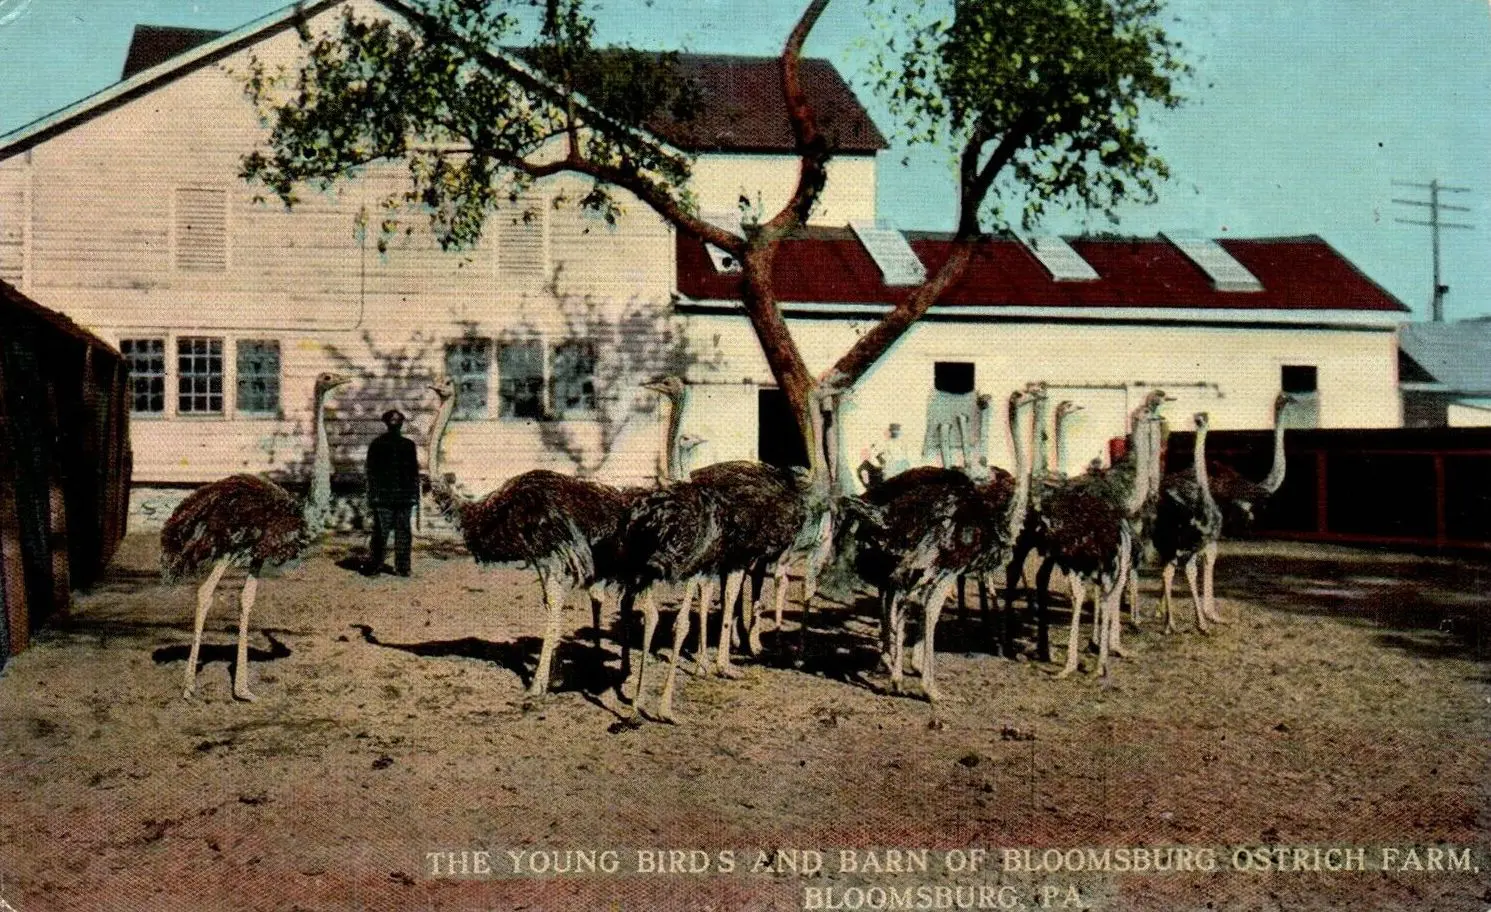 “The young birds and barn of Bloomsburg Ostrich Farm”